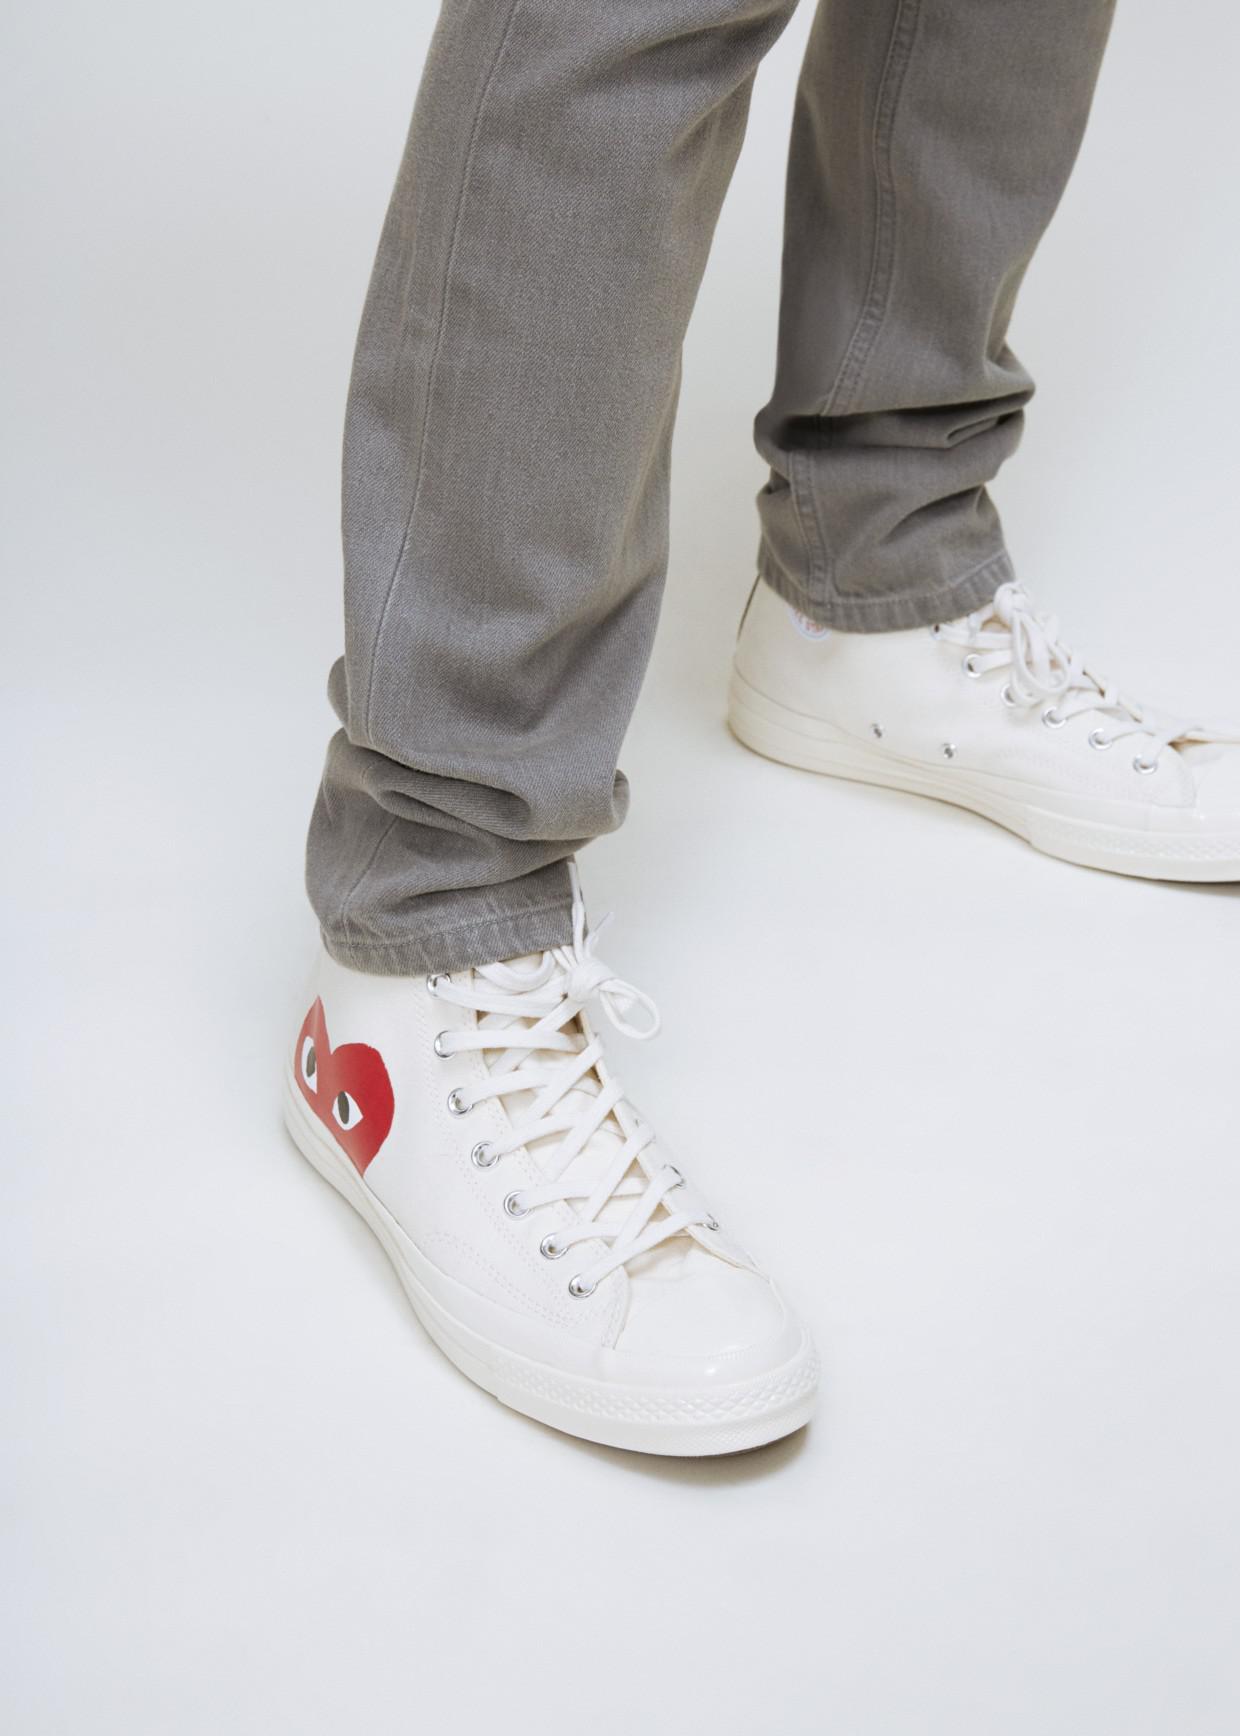 Cdg Converse Low White On Feet Flash Sales, GET 56% OFF, sportsregras.com